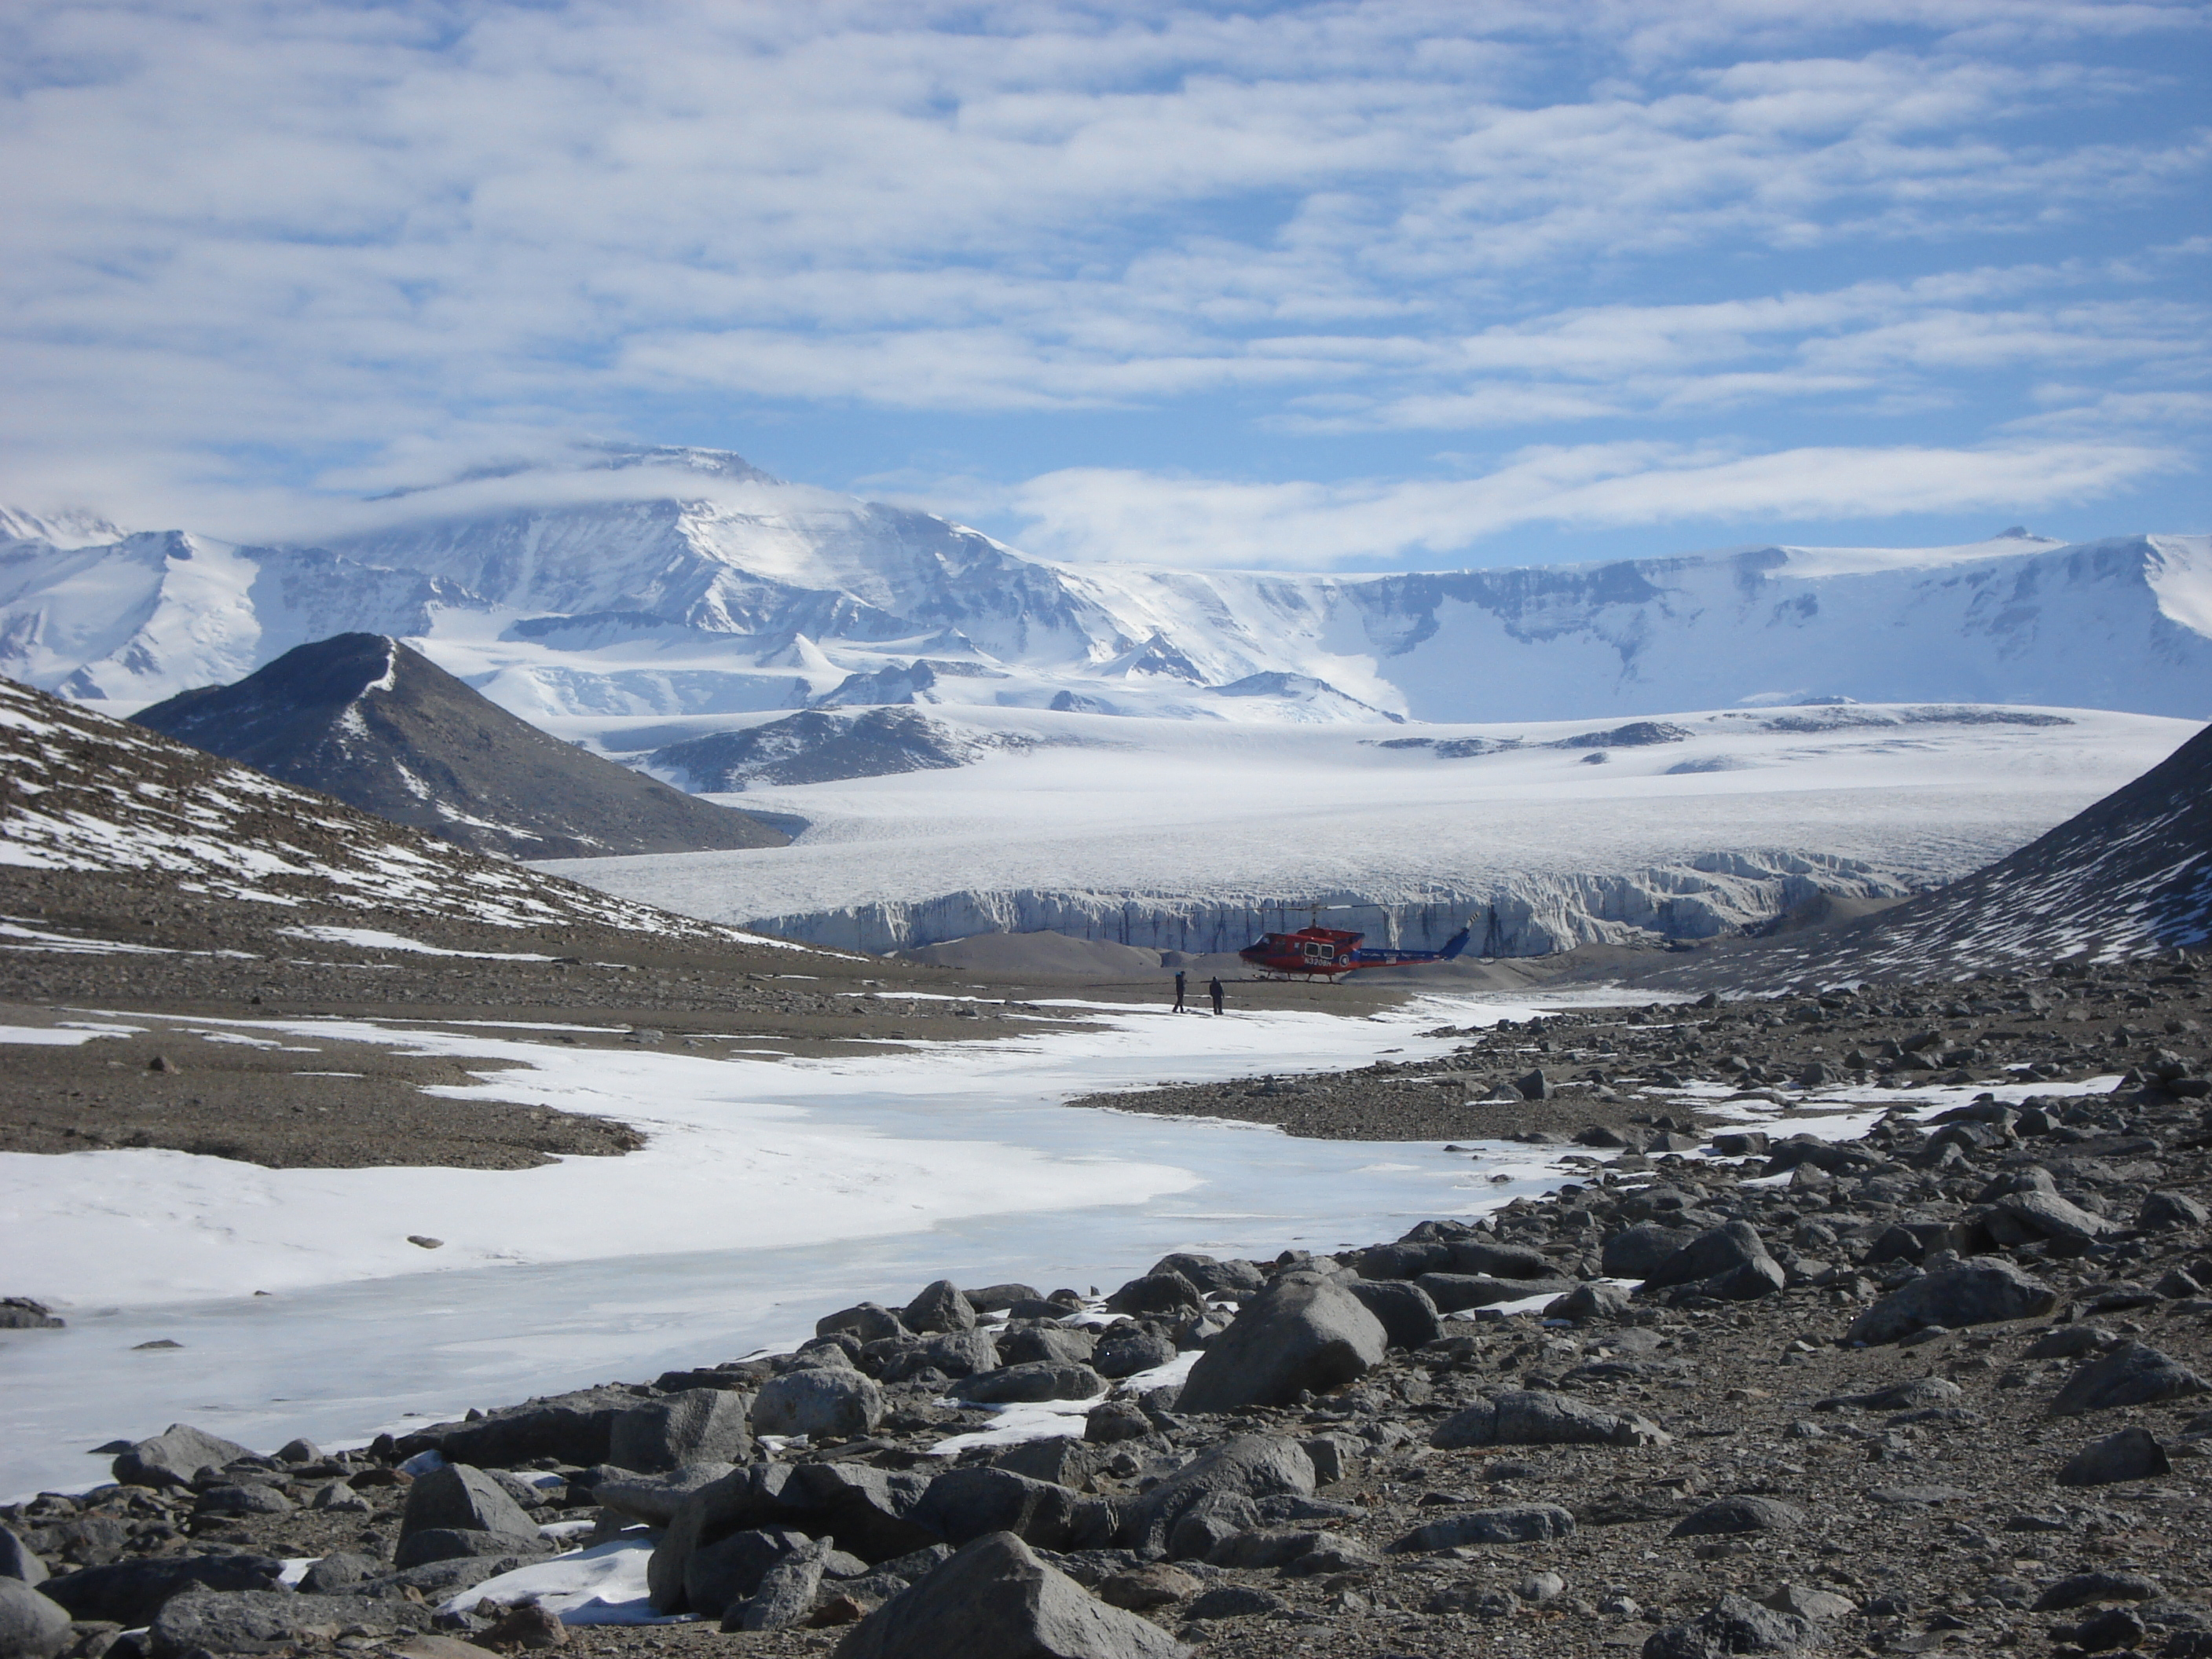 A helicopter and people on the ground near a glacier.